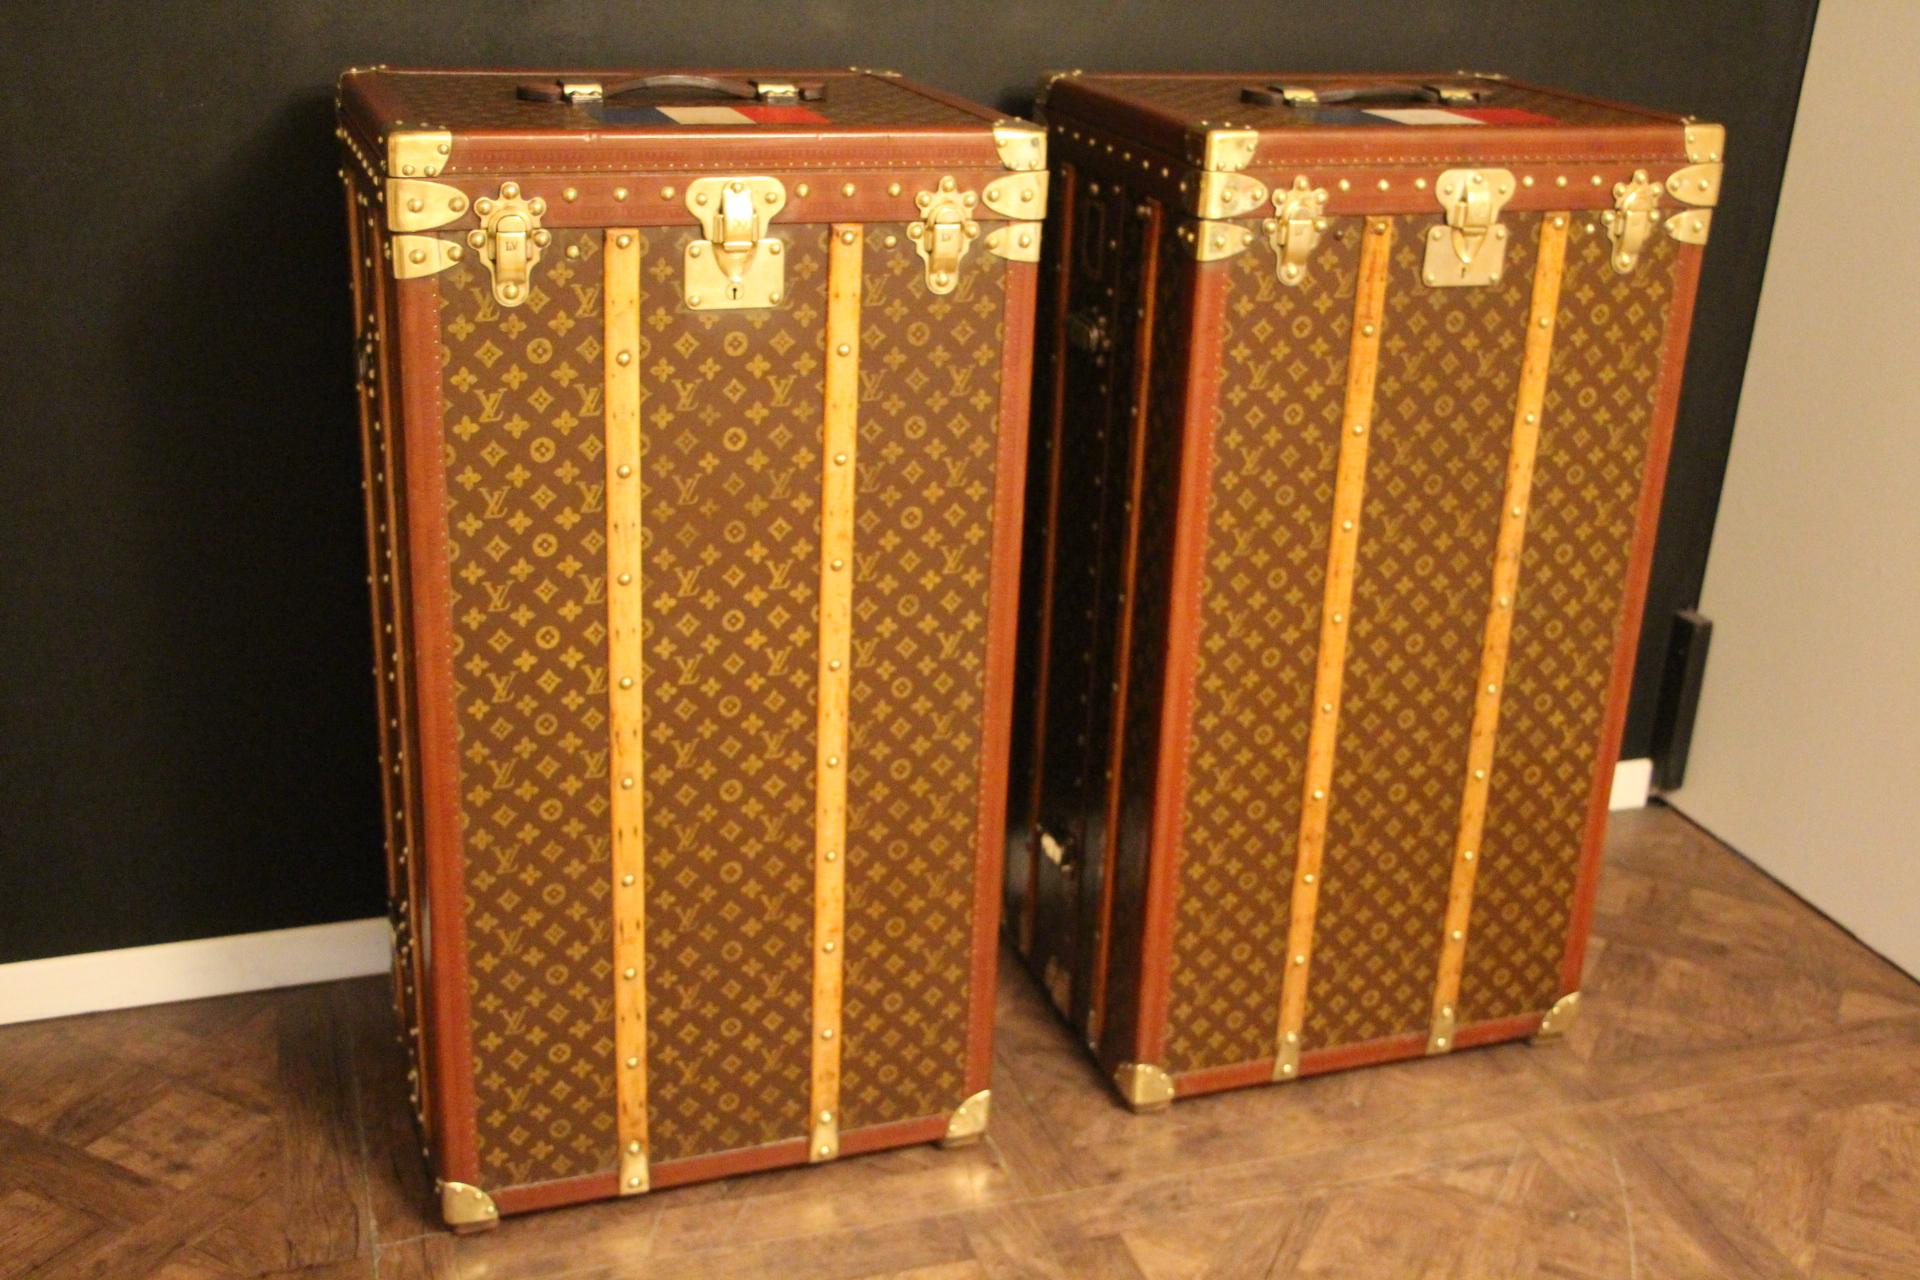 This very rare pair of Louis Vuitton wardrobe features stenciled monogram canvas, rich honey color lozine trims and solid brass locks. Its tops lift up.
Their locks, clasps and studs are marked Louis Vuitton. Their customized French flag painted on